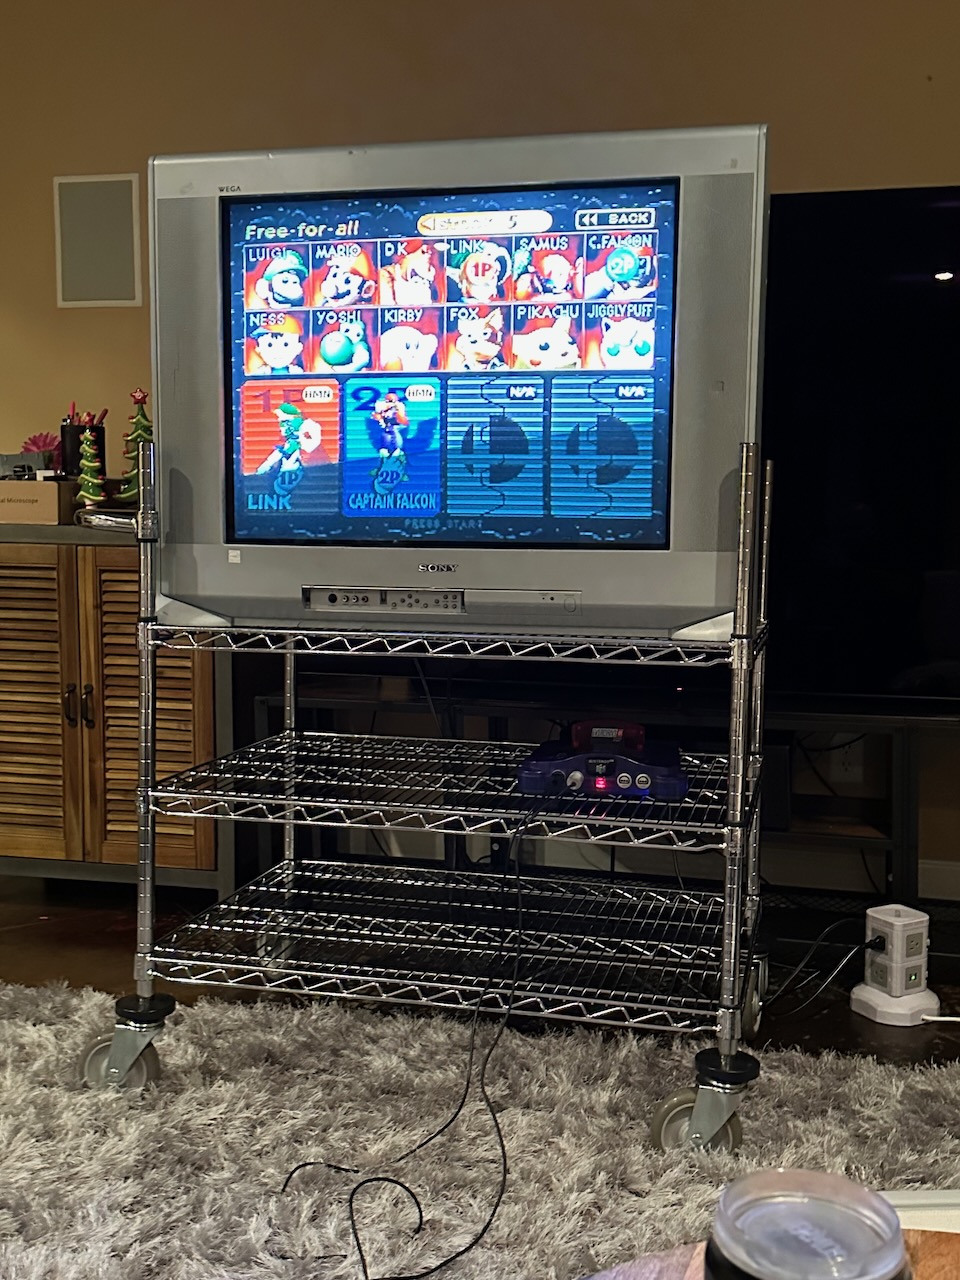 Wire rack rolling cart with a 32" Sony Wega TV and a grape N64